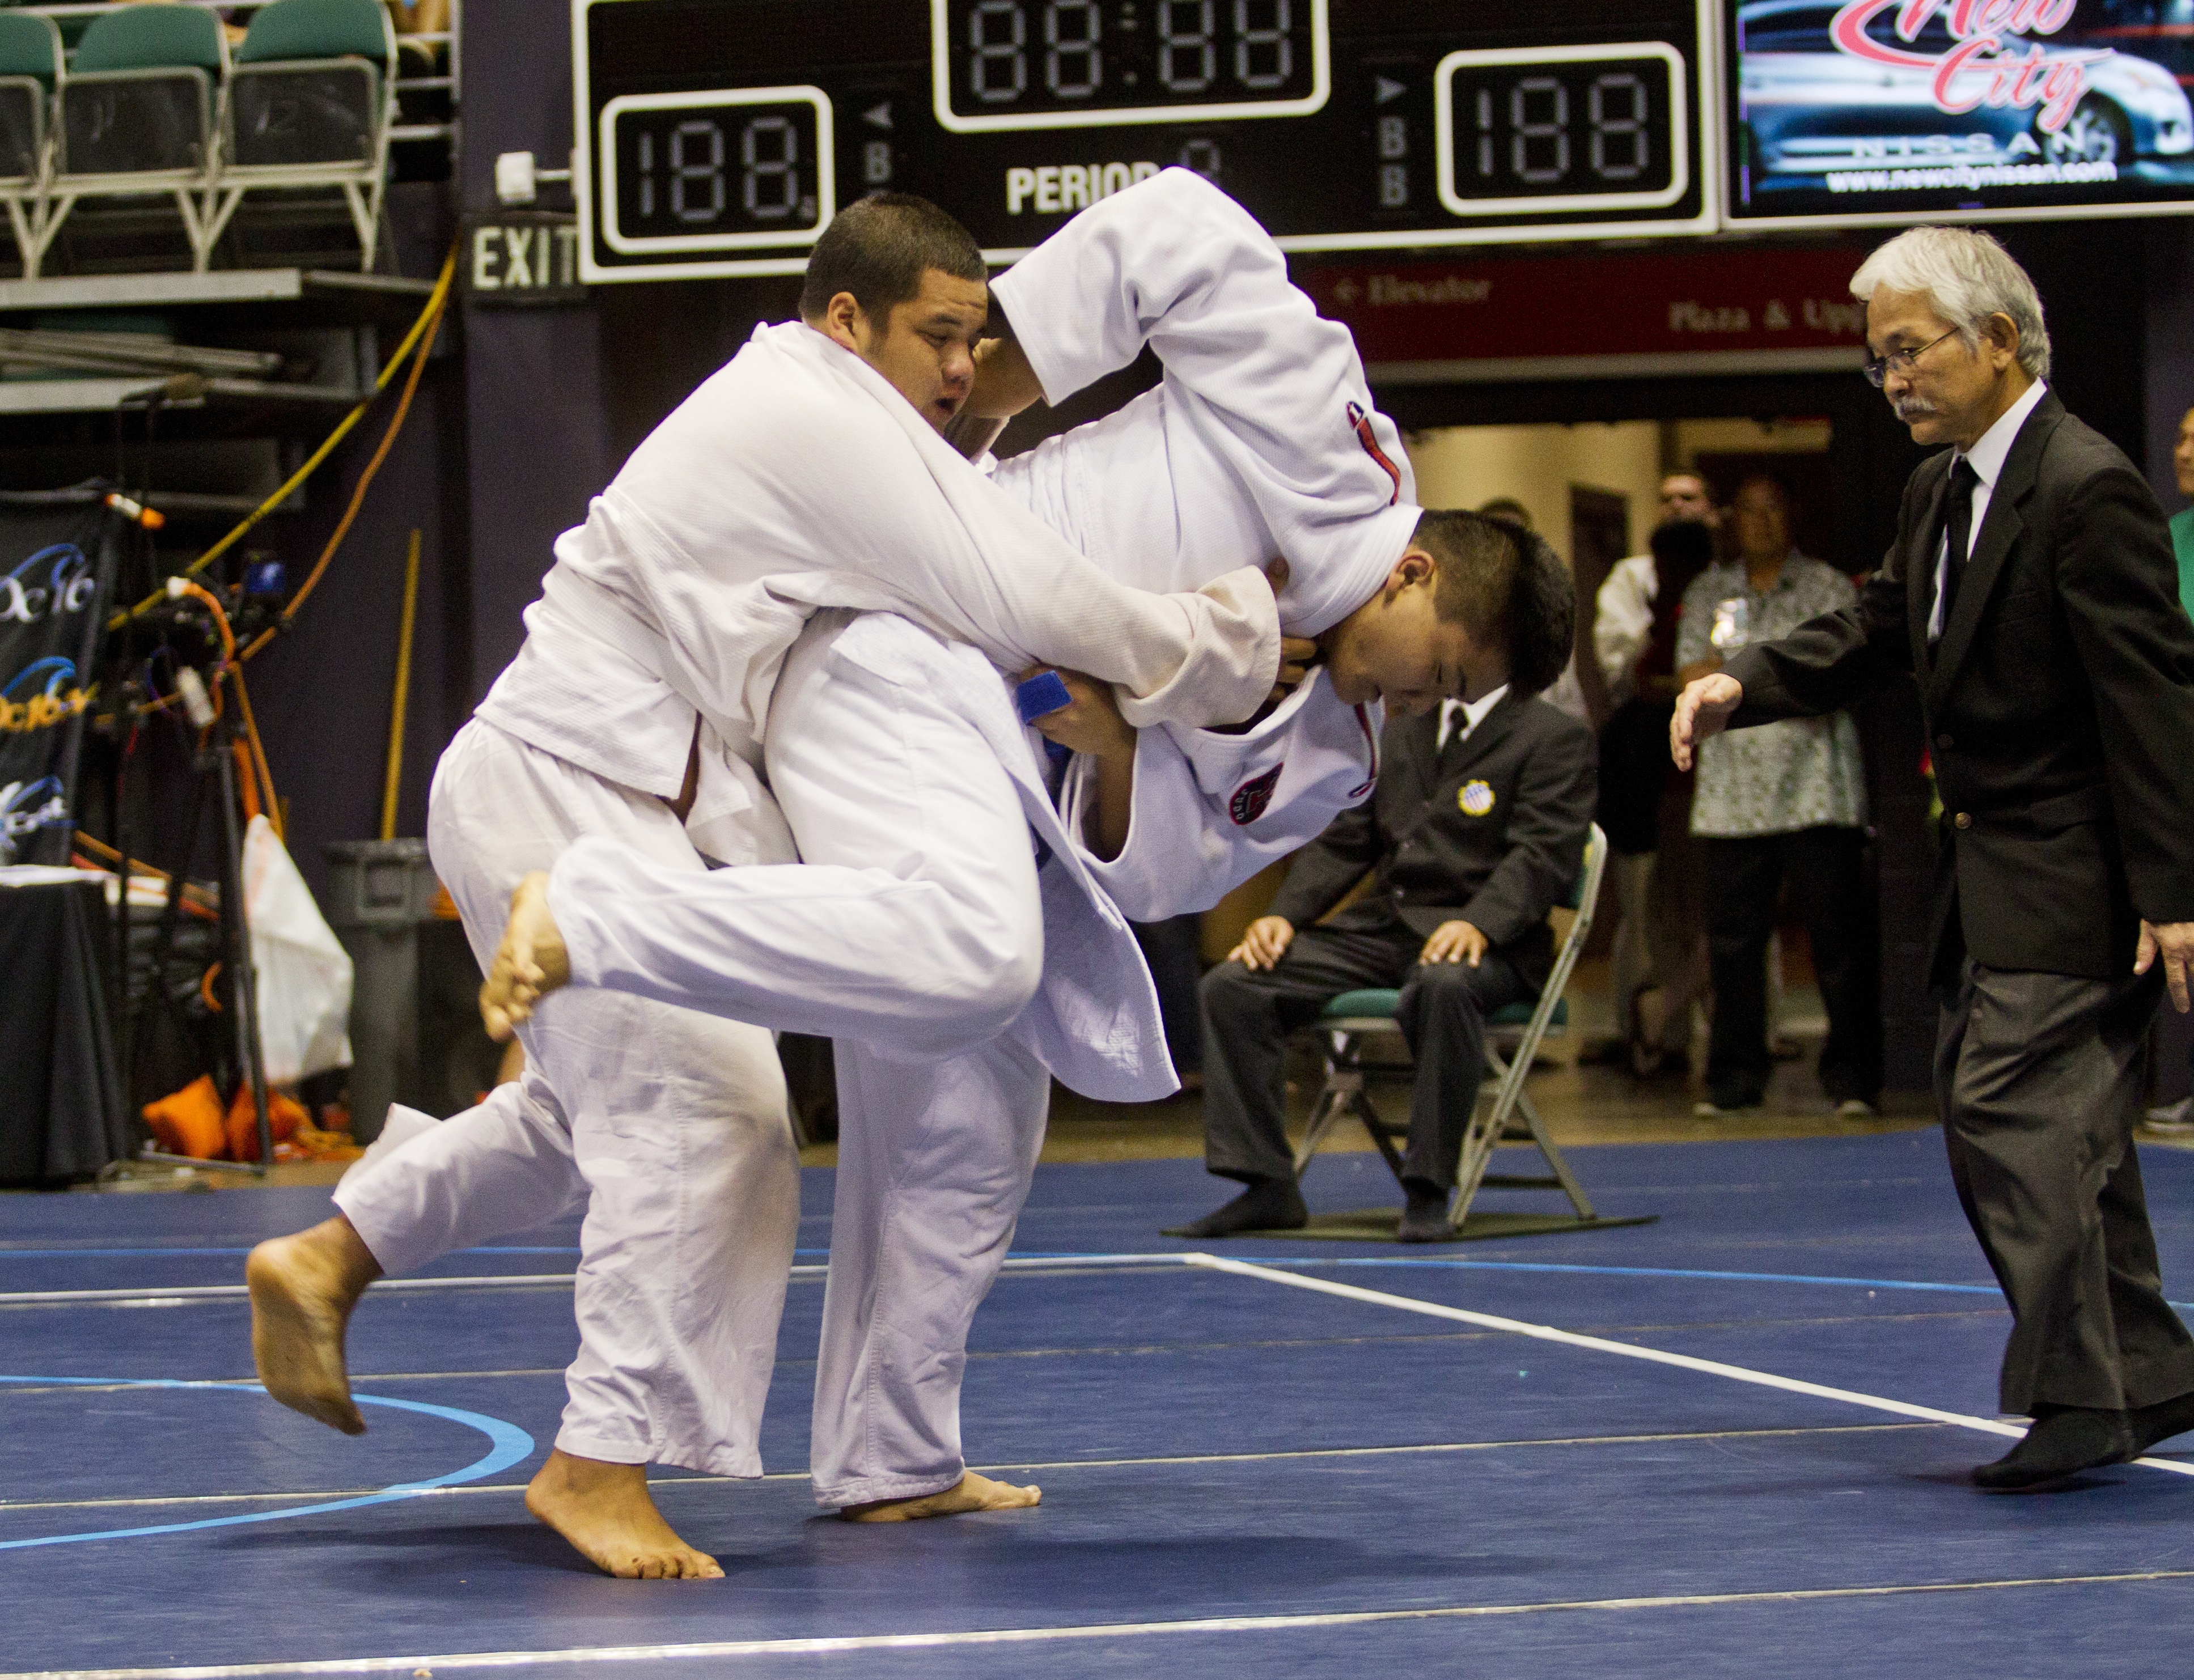 HHSAA State Judo Championship, May 7